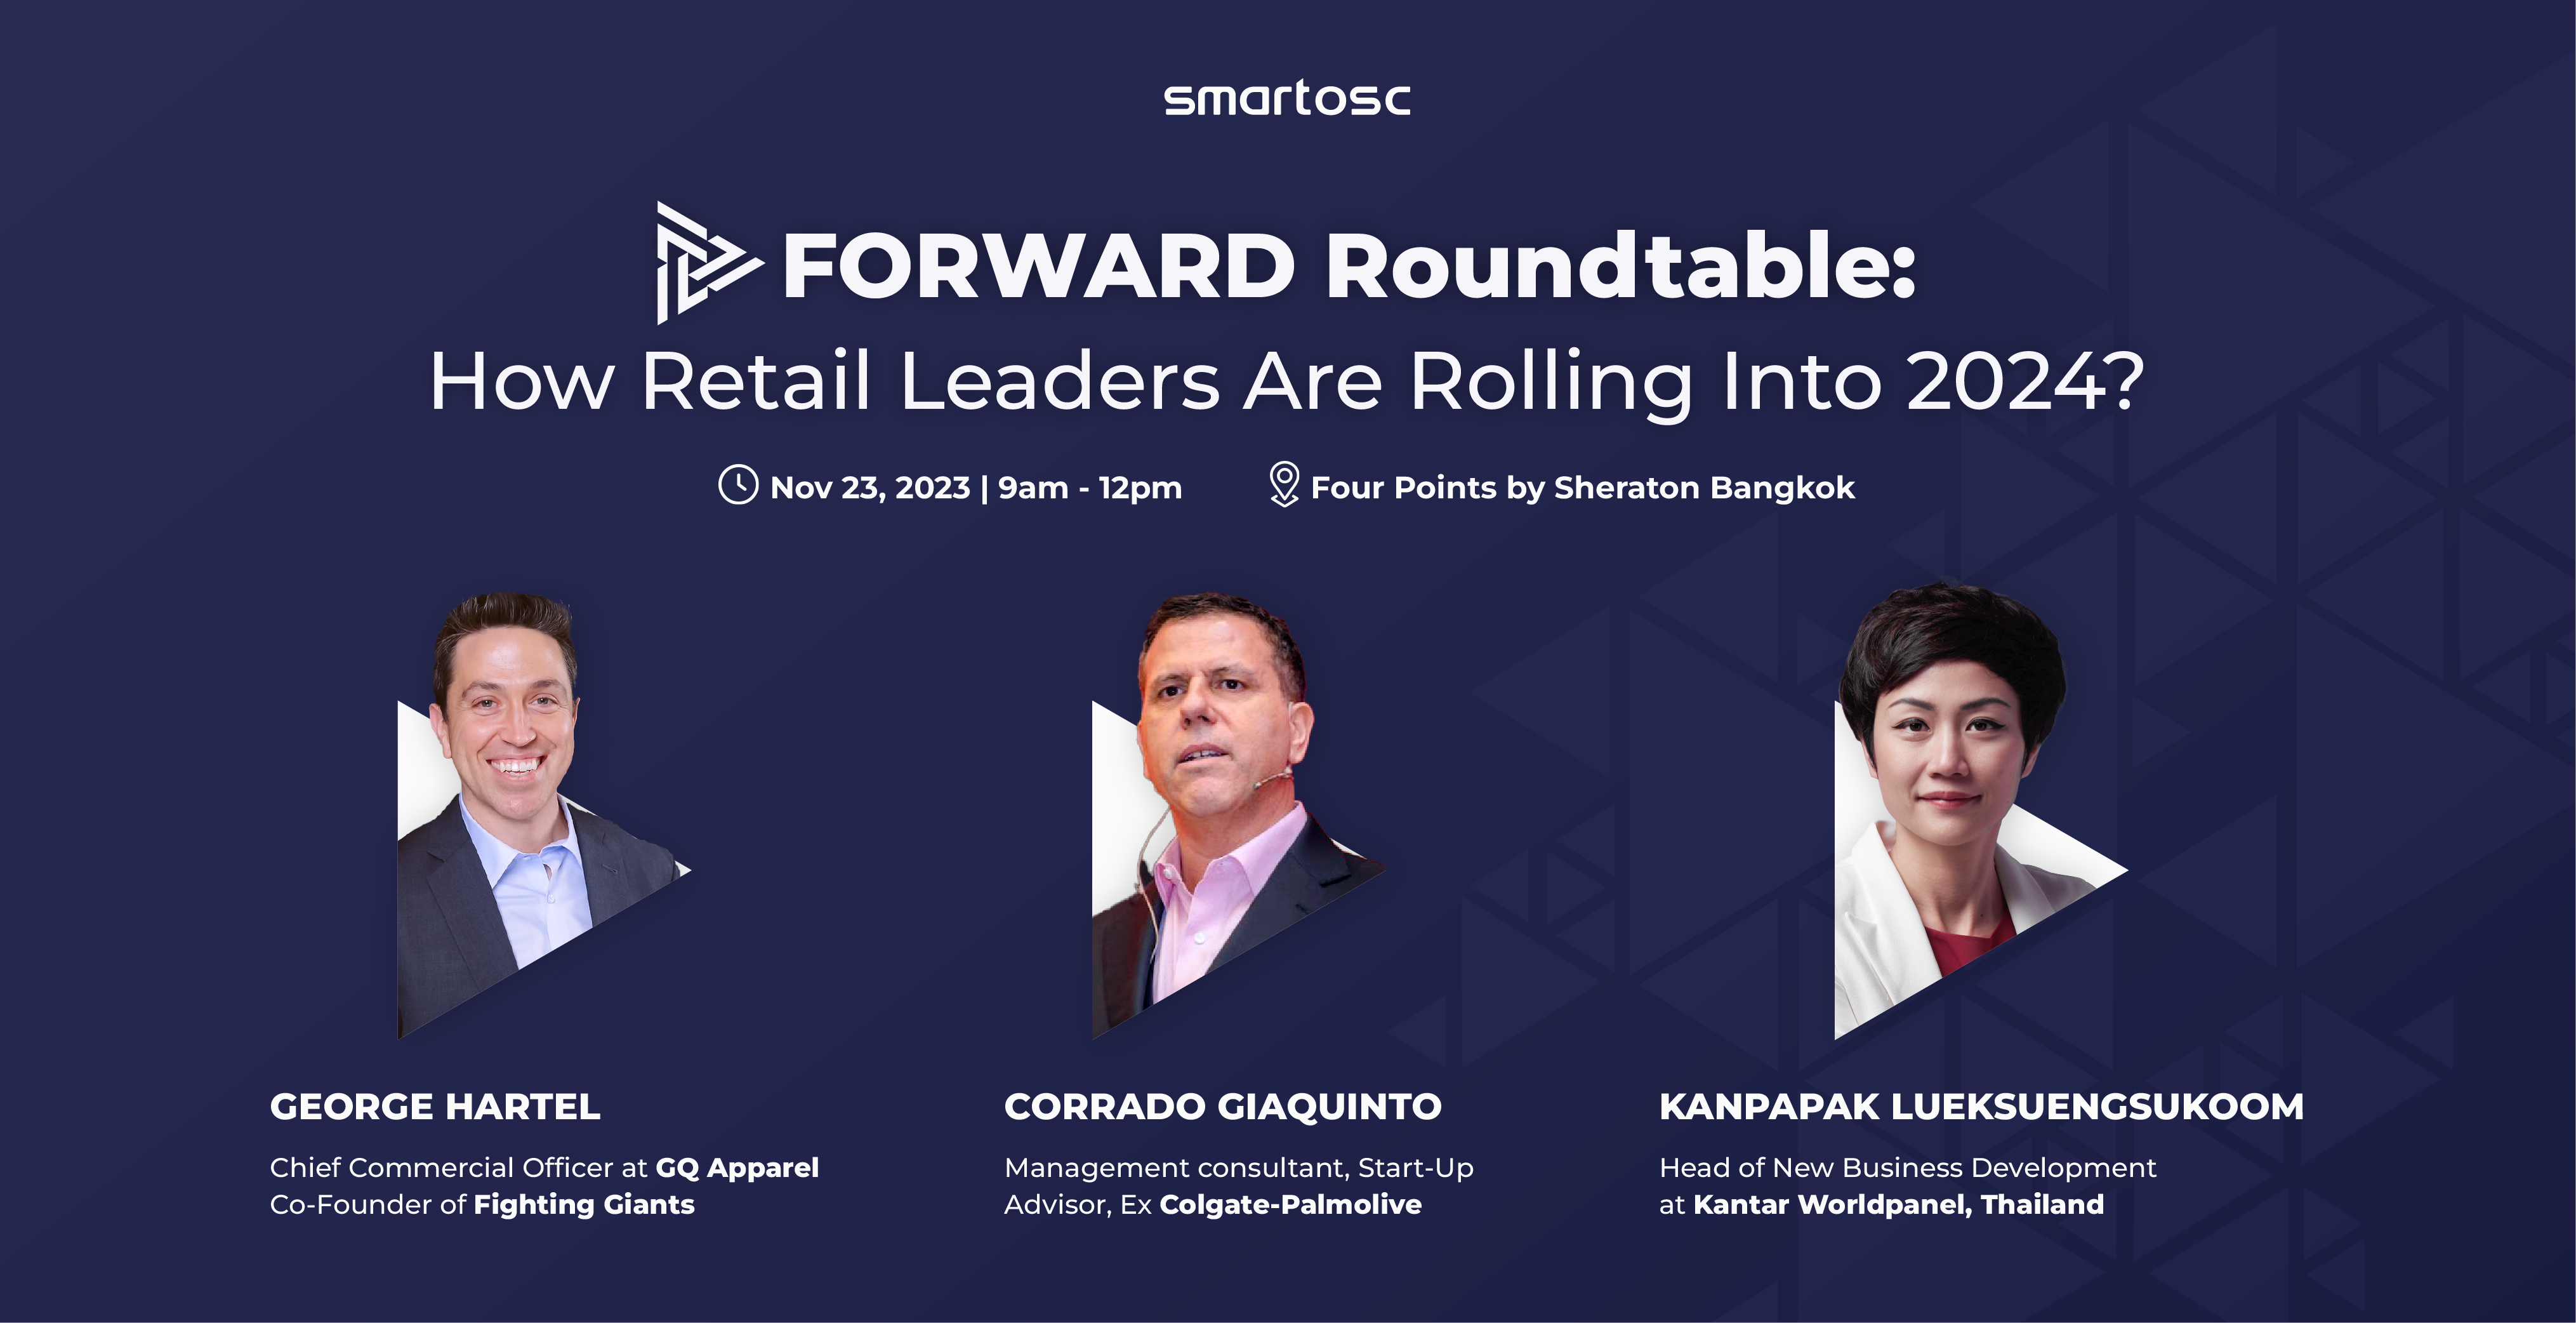 Forward Roundtable: How Retail Leaders Are Rolling Into 2024 – Key Takeaways